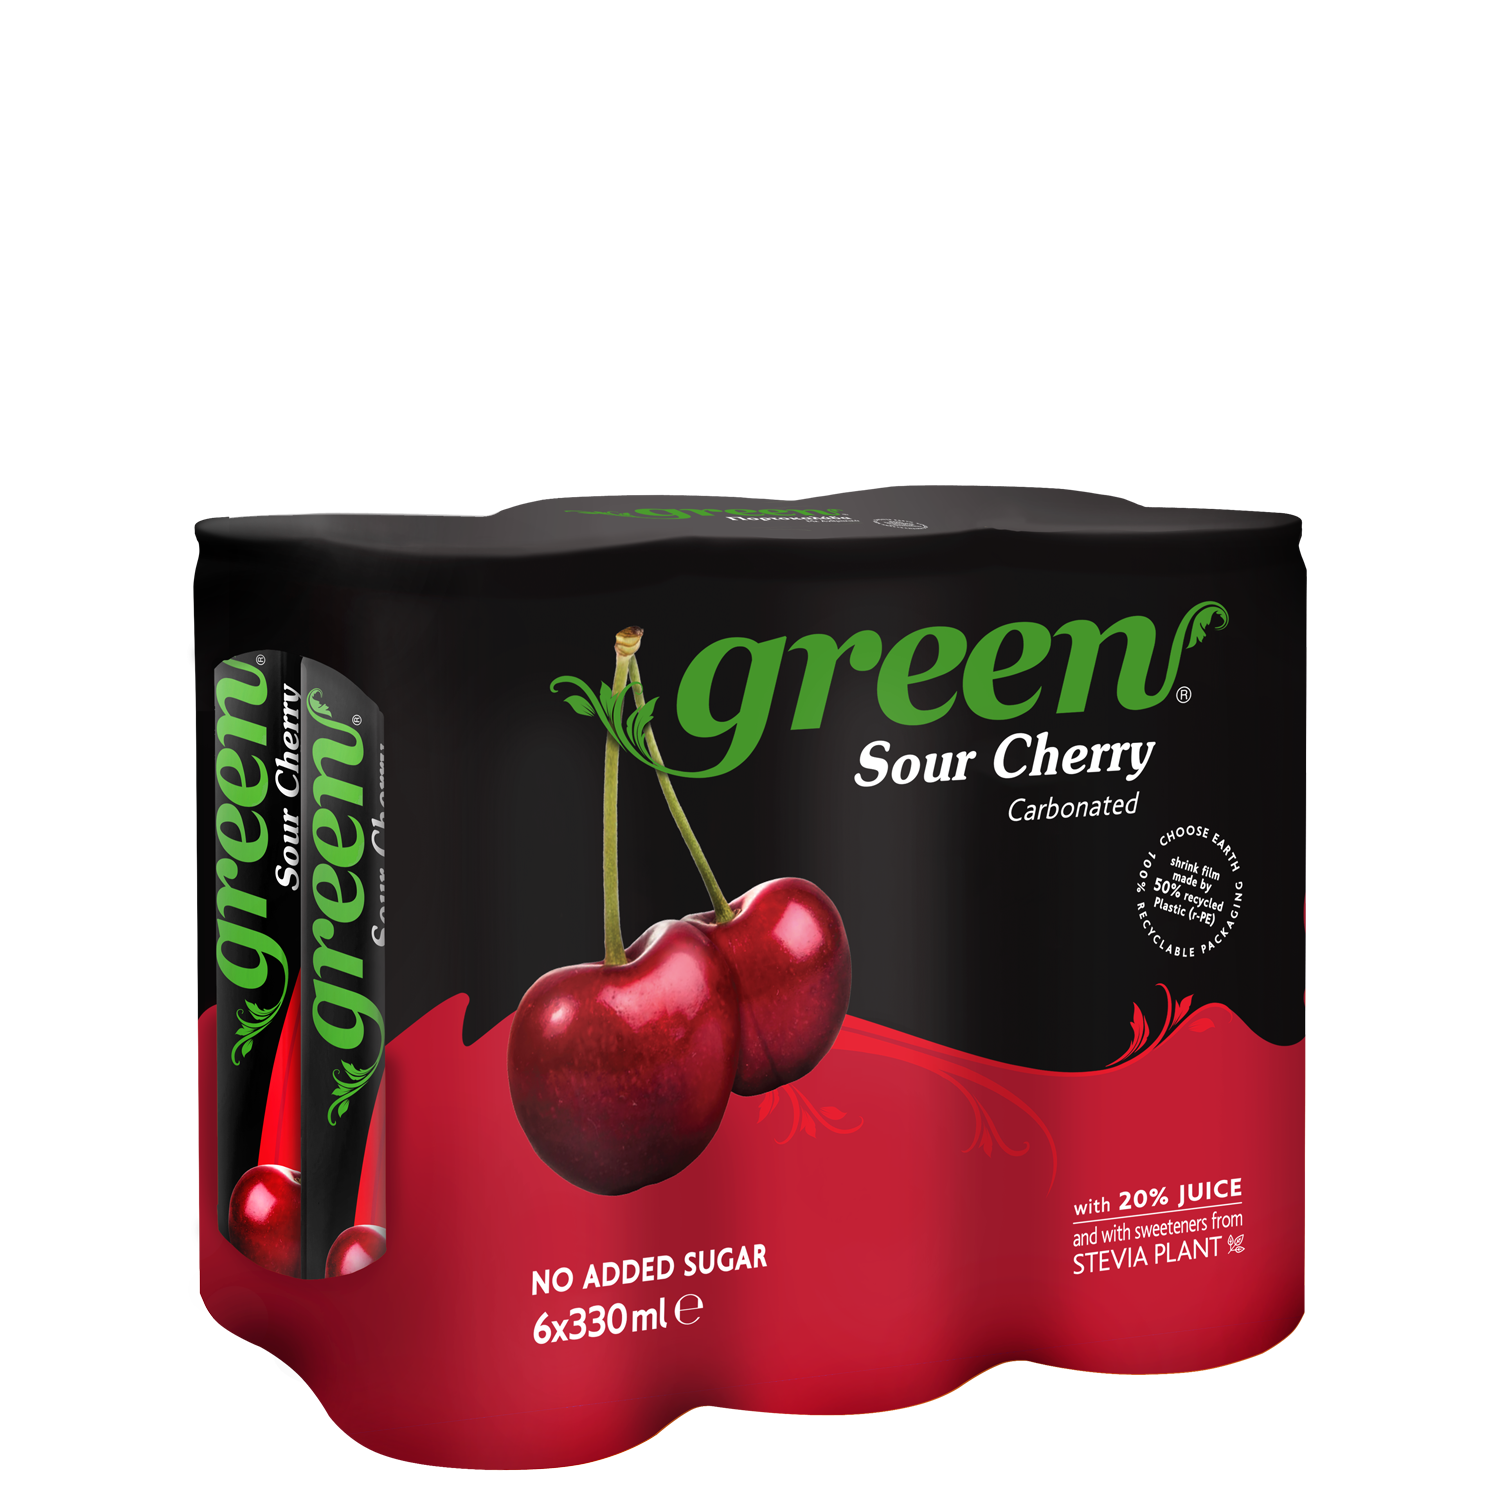 Green Cherry - 6x330ml - Multi Pack cans